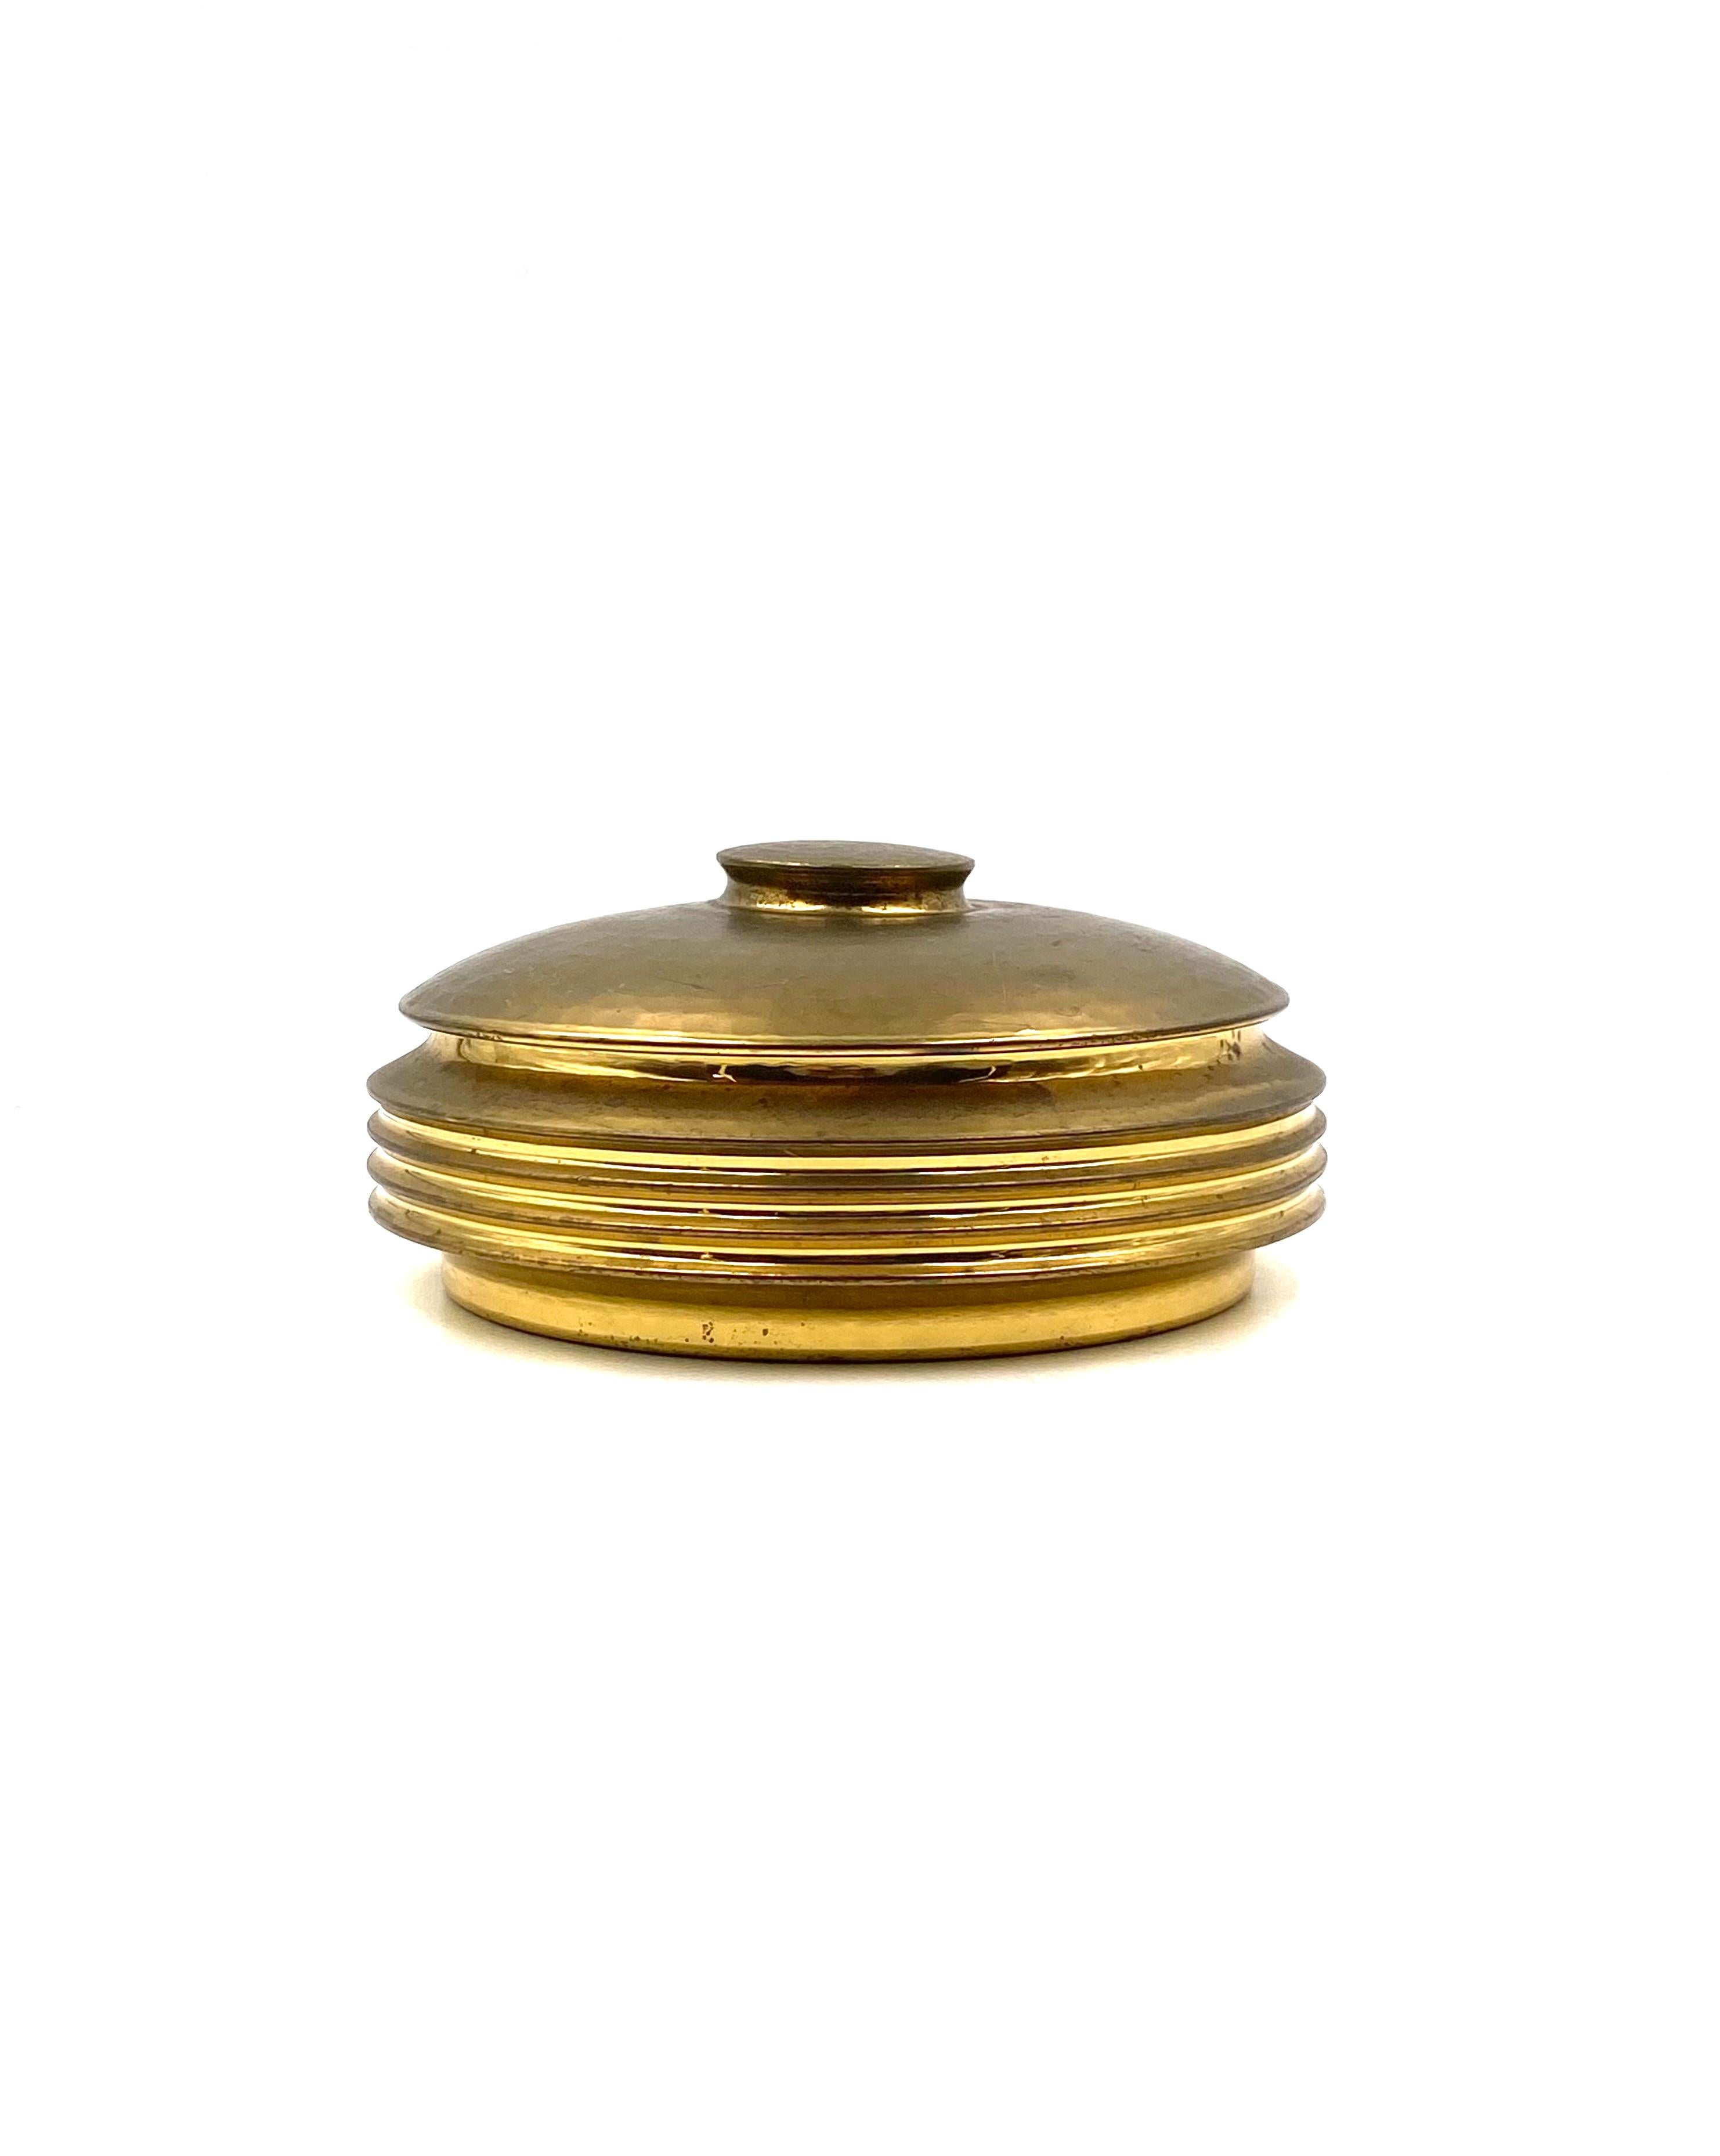 Mid-century  hand-hammered brass box 

Zanetto Padova Italy 1970s

Zanetto is a luxury company founded in 1963 in Padua. The company creates, entirely by hand, furnishing objects and tableware in bronze, copper, brass, silver and other noble